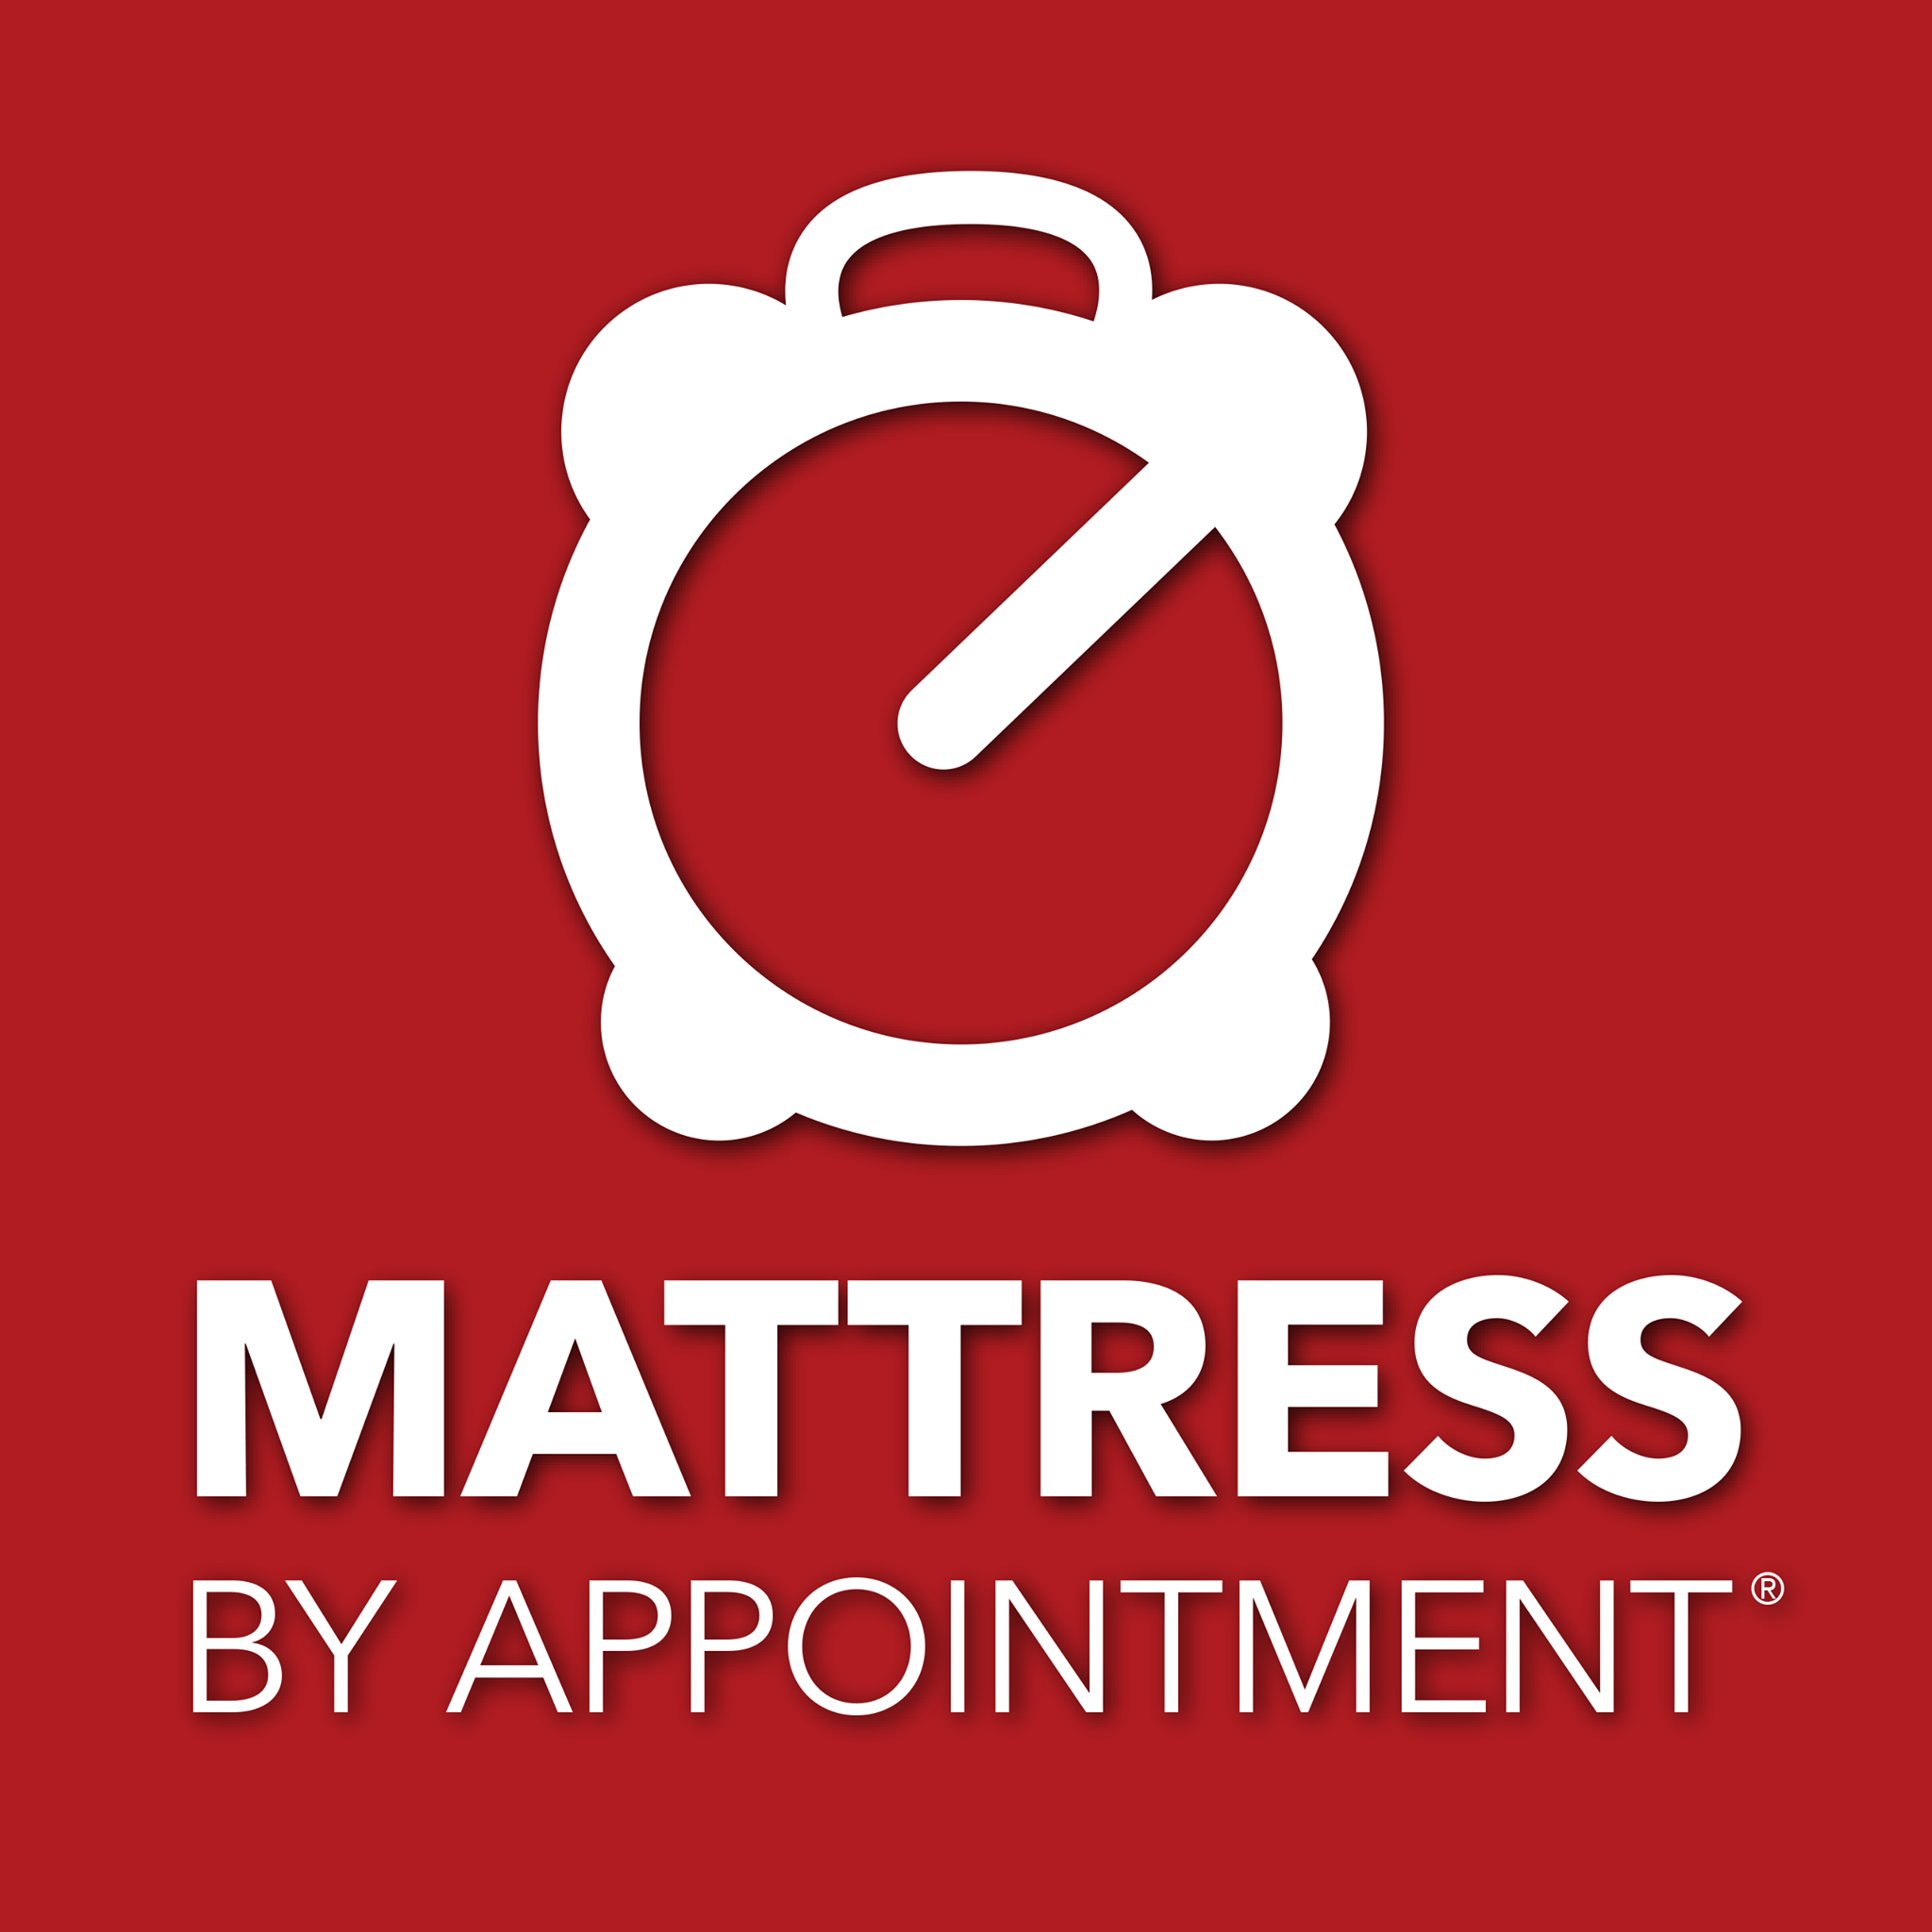 Mattress by Appointment